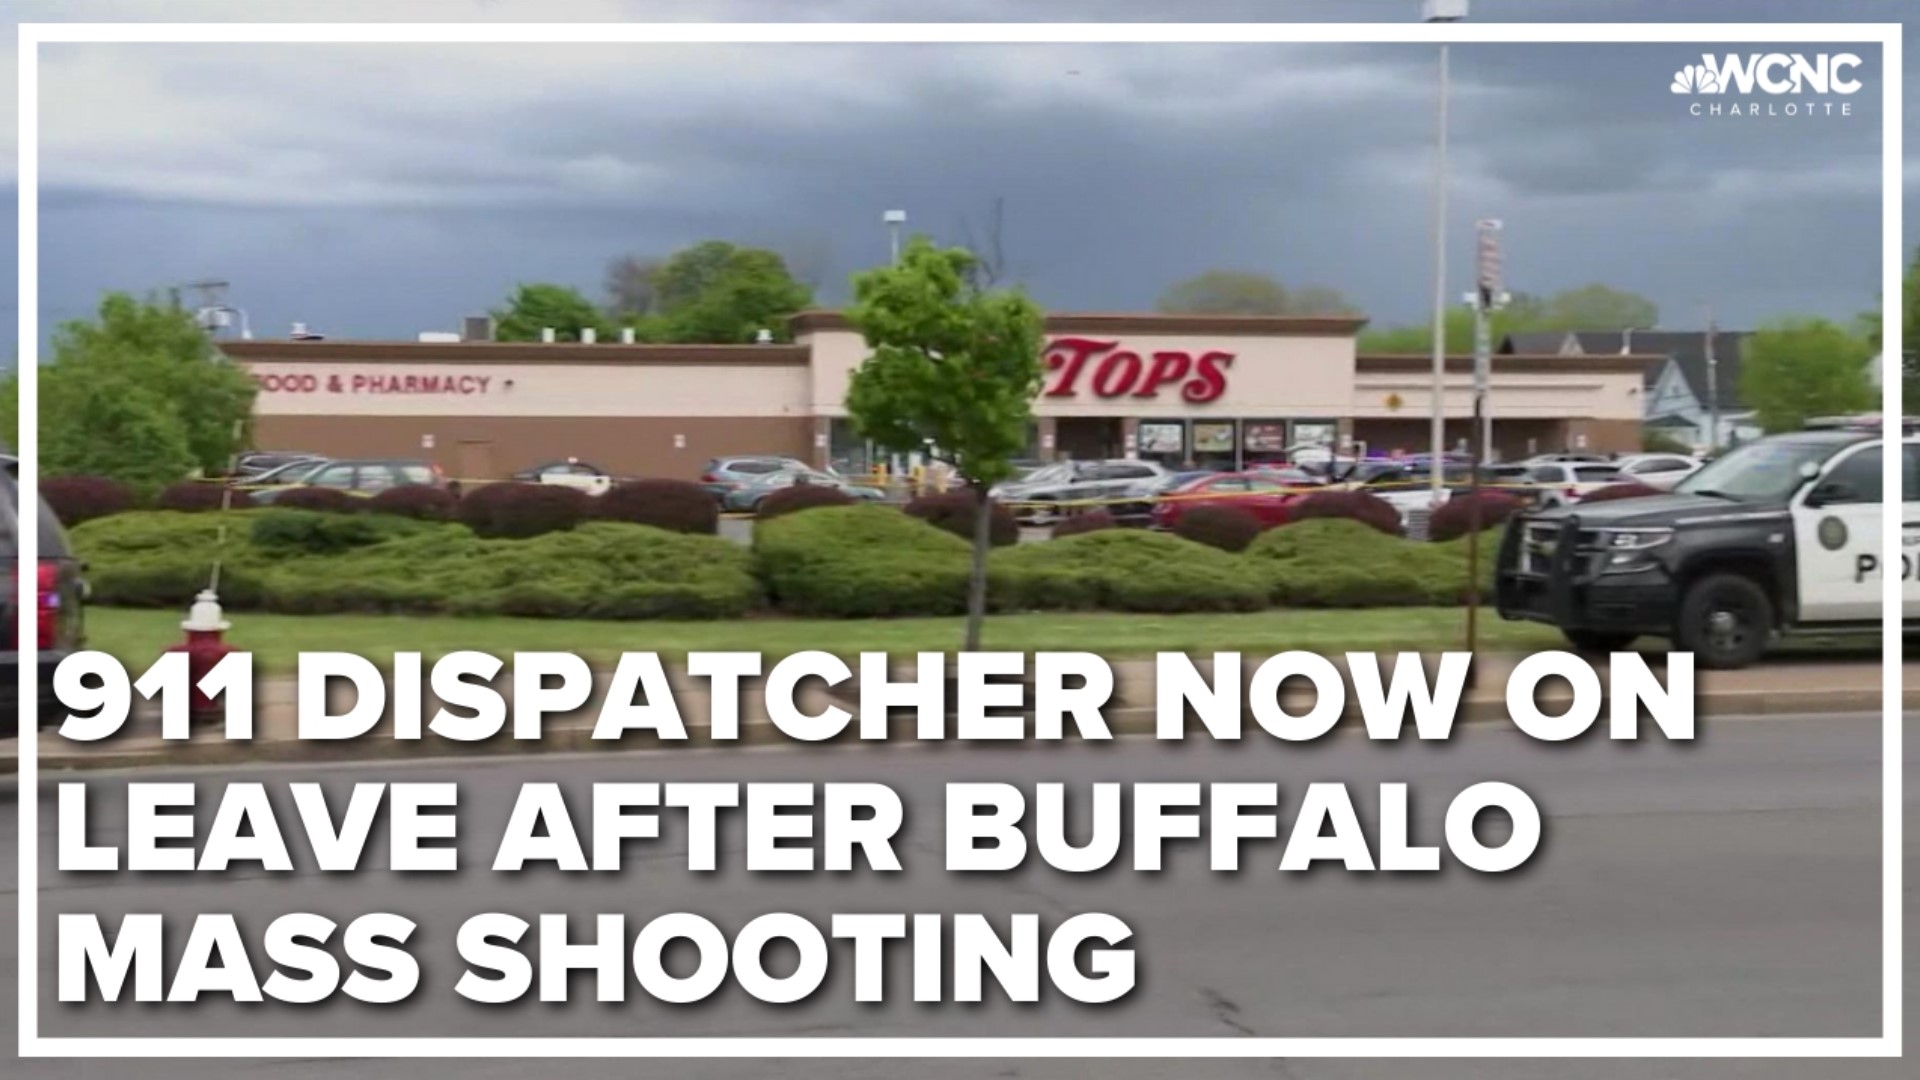 The 911 dispatcher accused of hanging up on a woman who called from inside the Buffalo grocery store that was being attacked on Saturday, is now off the job.